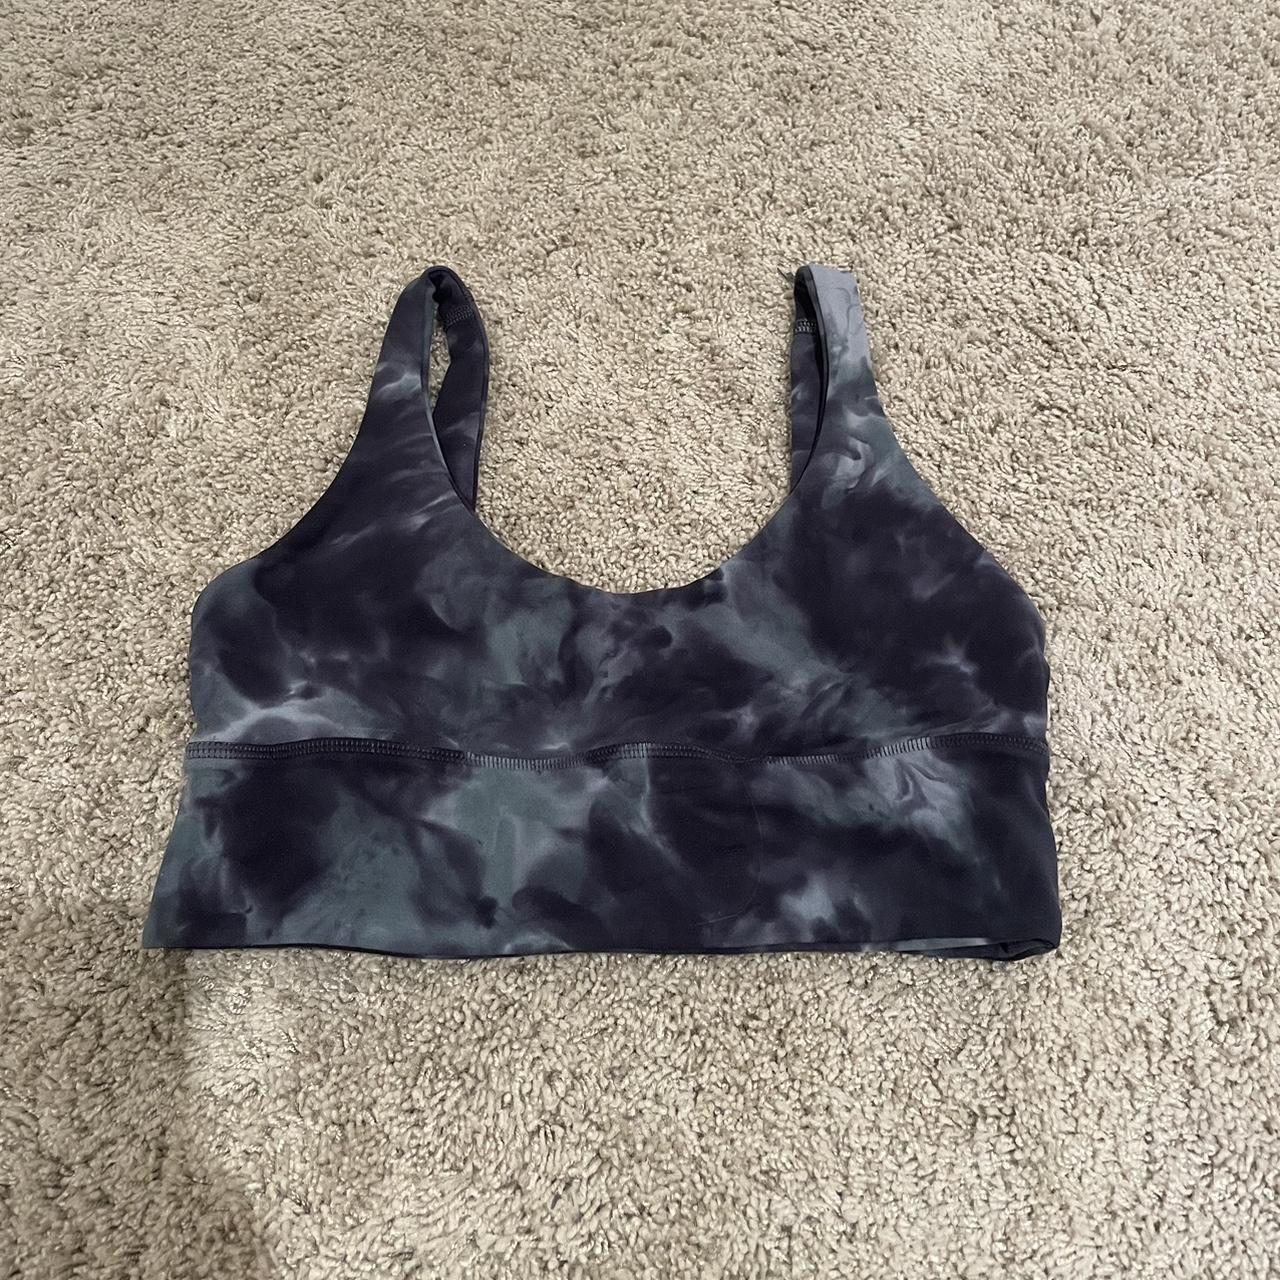 New with tags lululemon align bra. Size 6 and - Depop